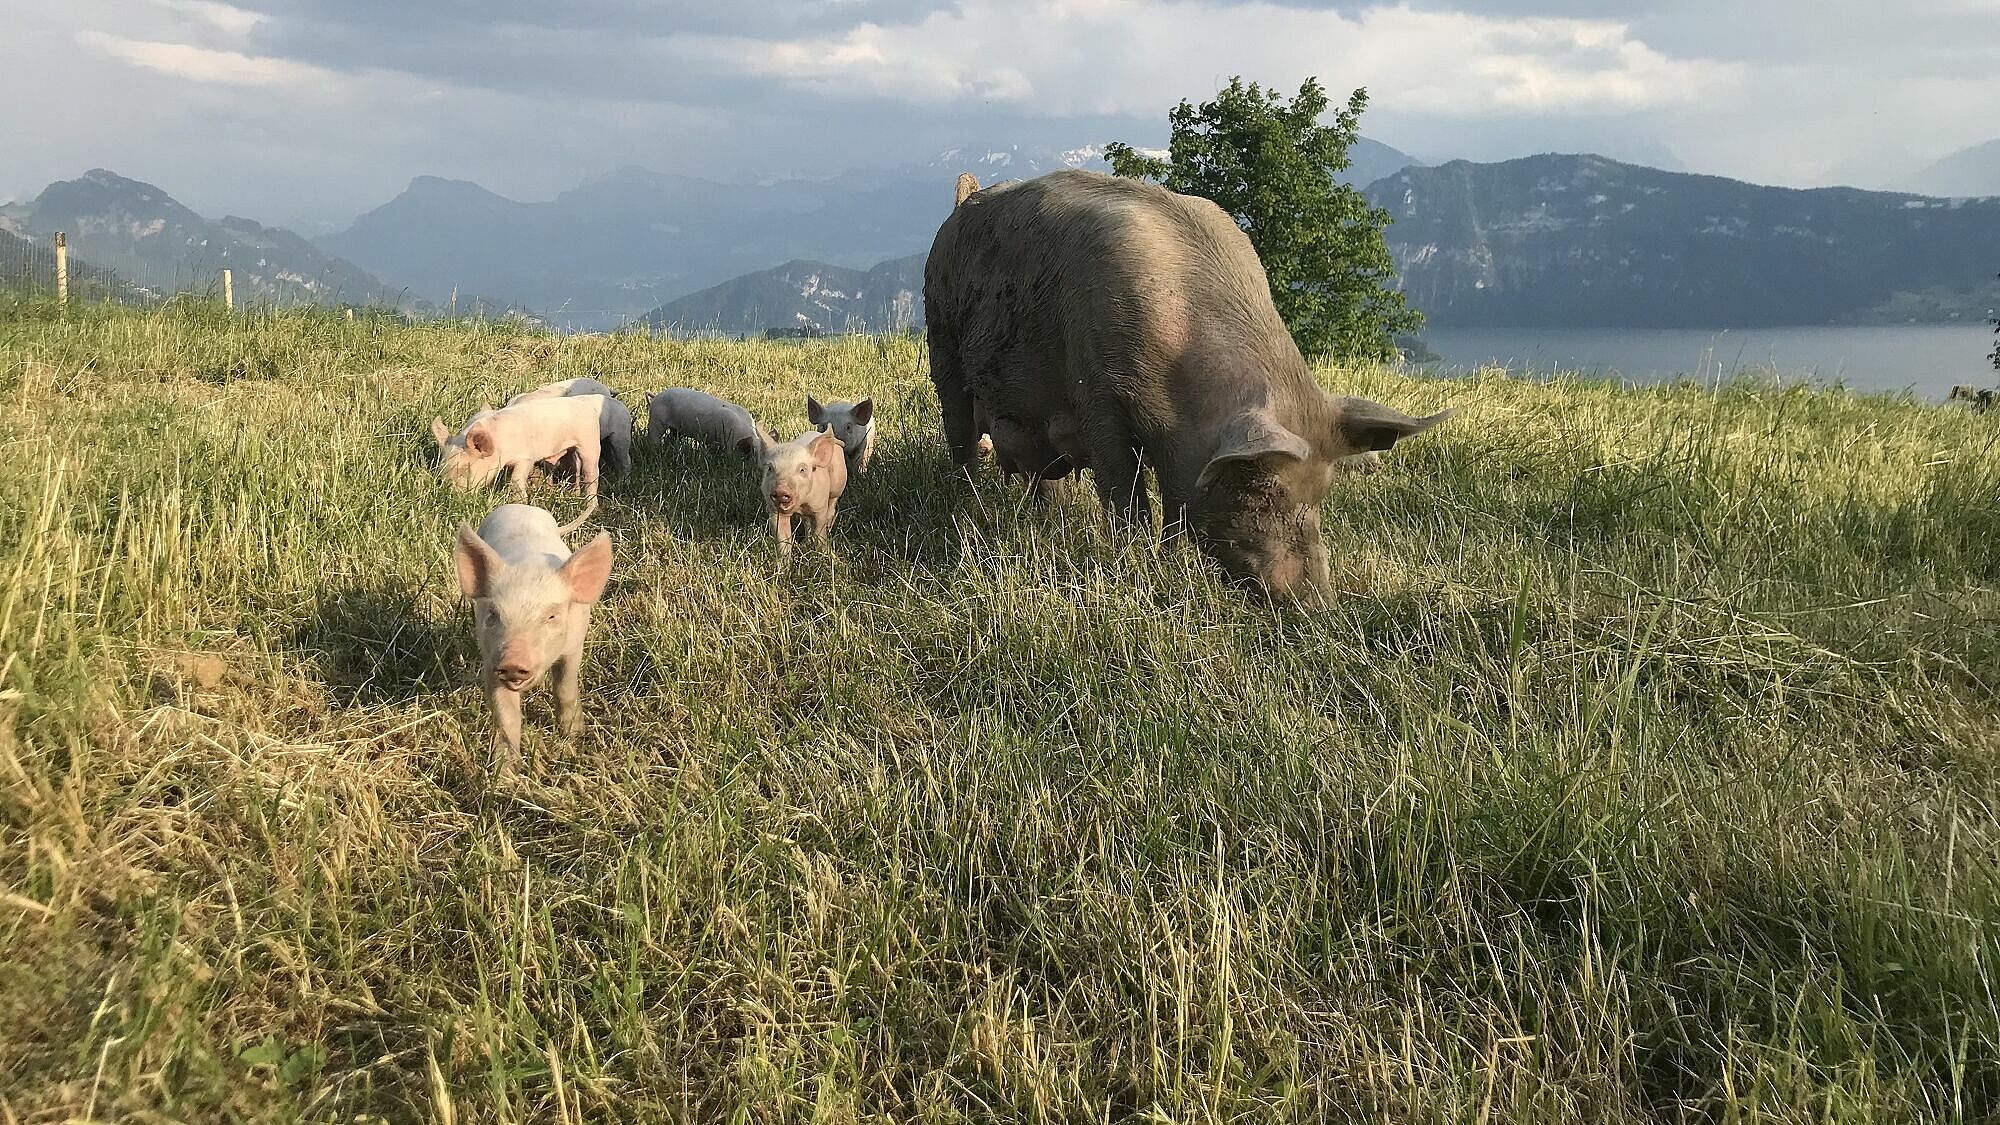 A sow with piglets run towards the camera on a stubbly field. In the background you can see Swiss mountains, a lake and clouds. The light is dramatic.